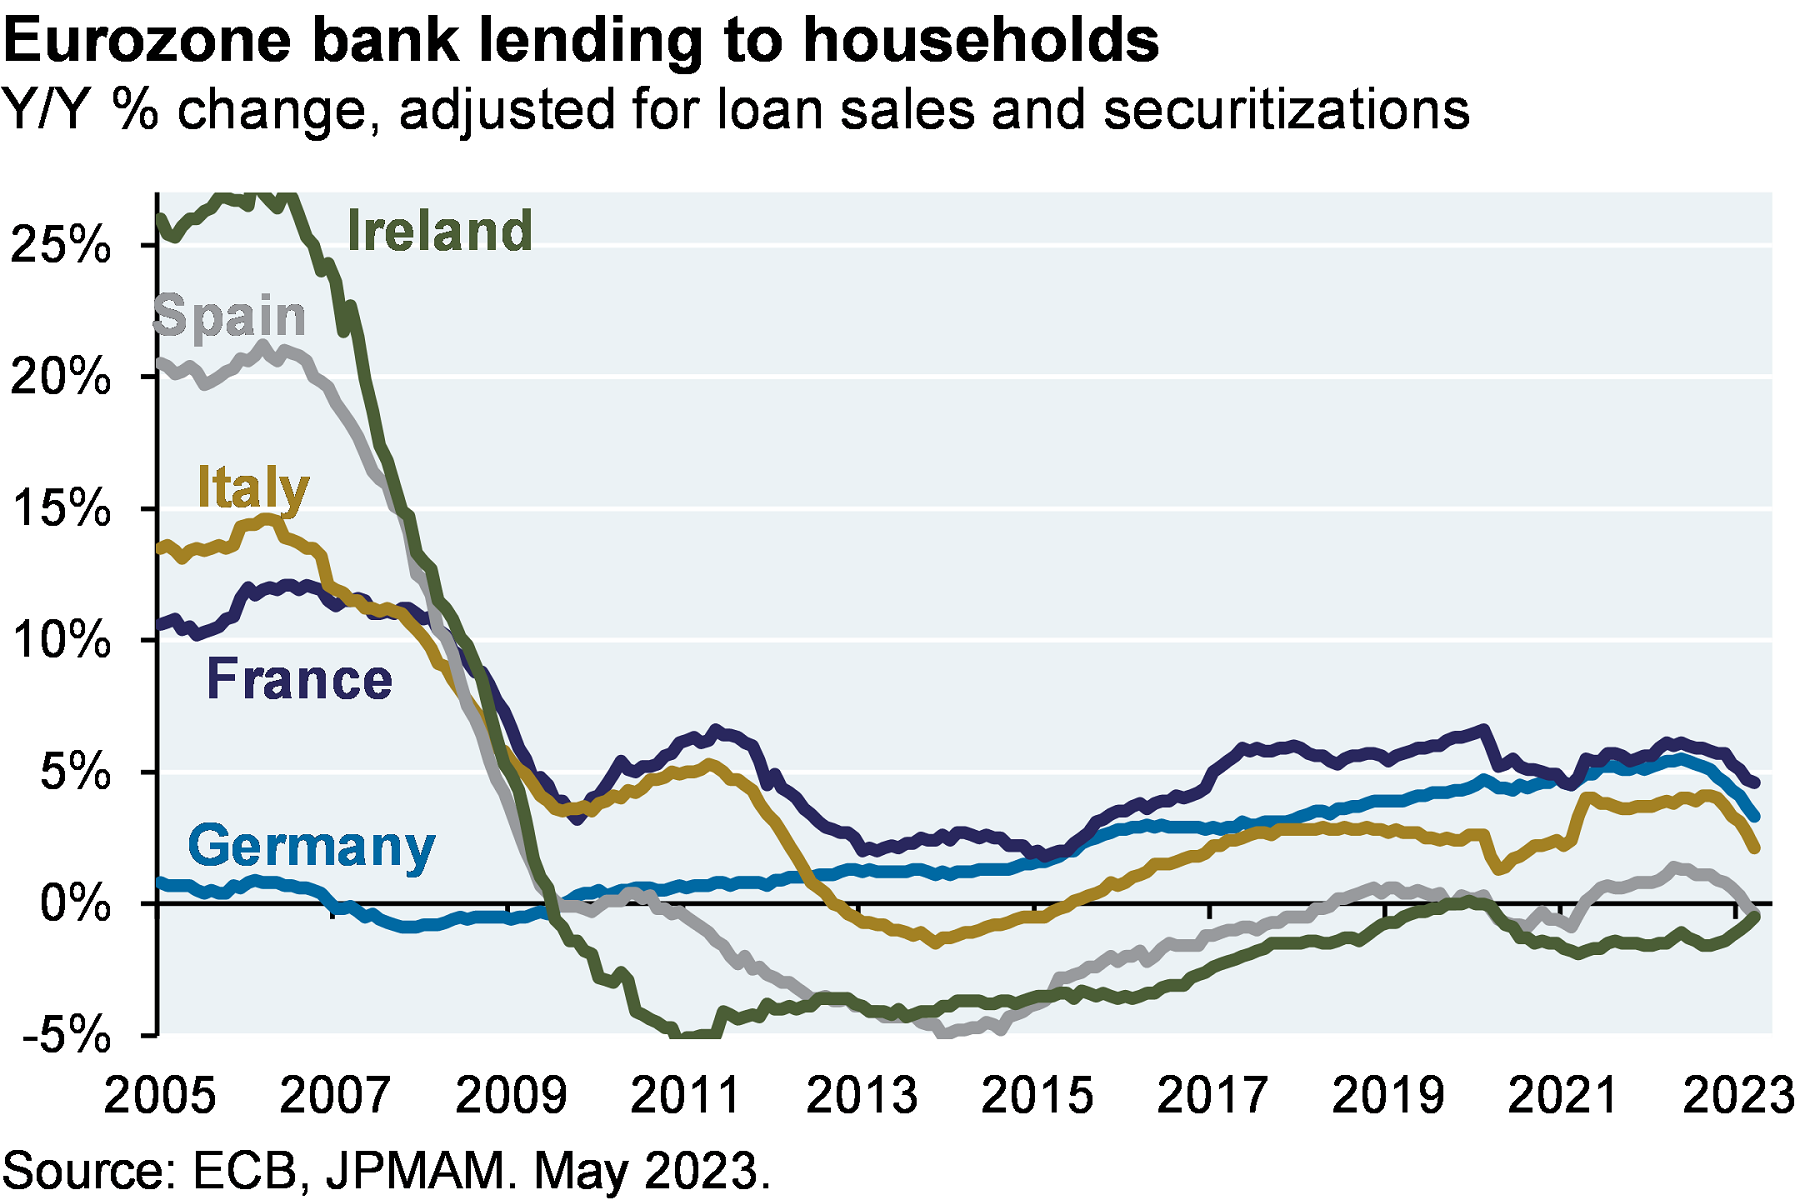 Eurozone bank leading to households